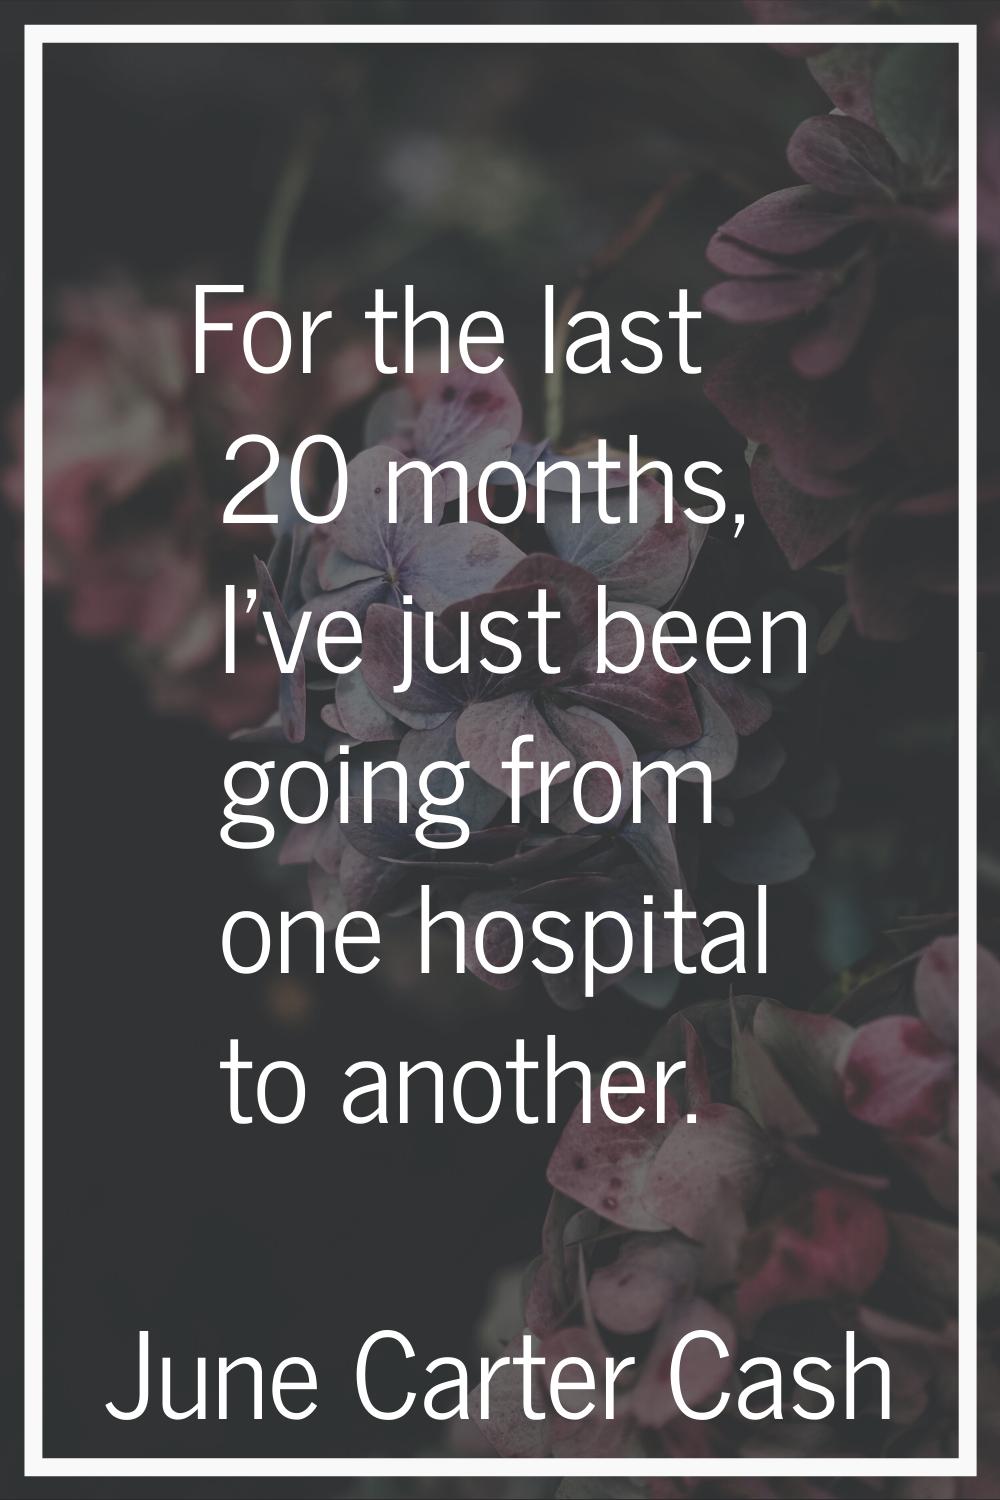 For the last 20 months, I've just been going from one hospital to another.